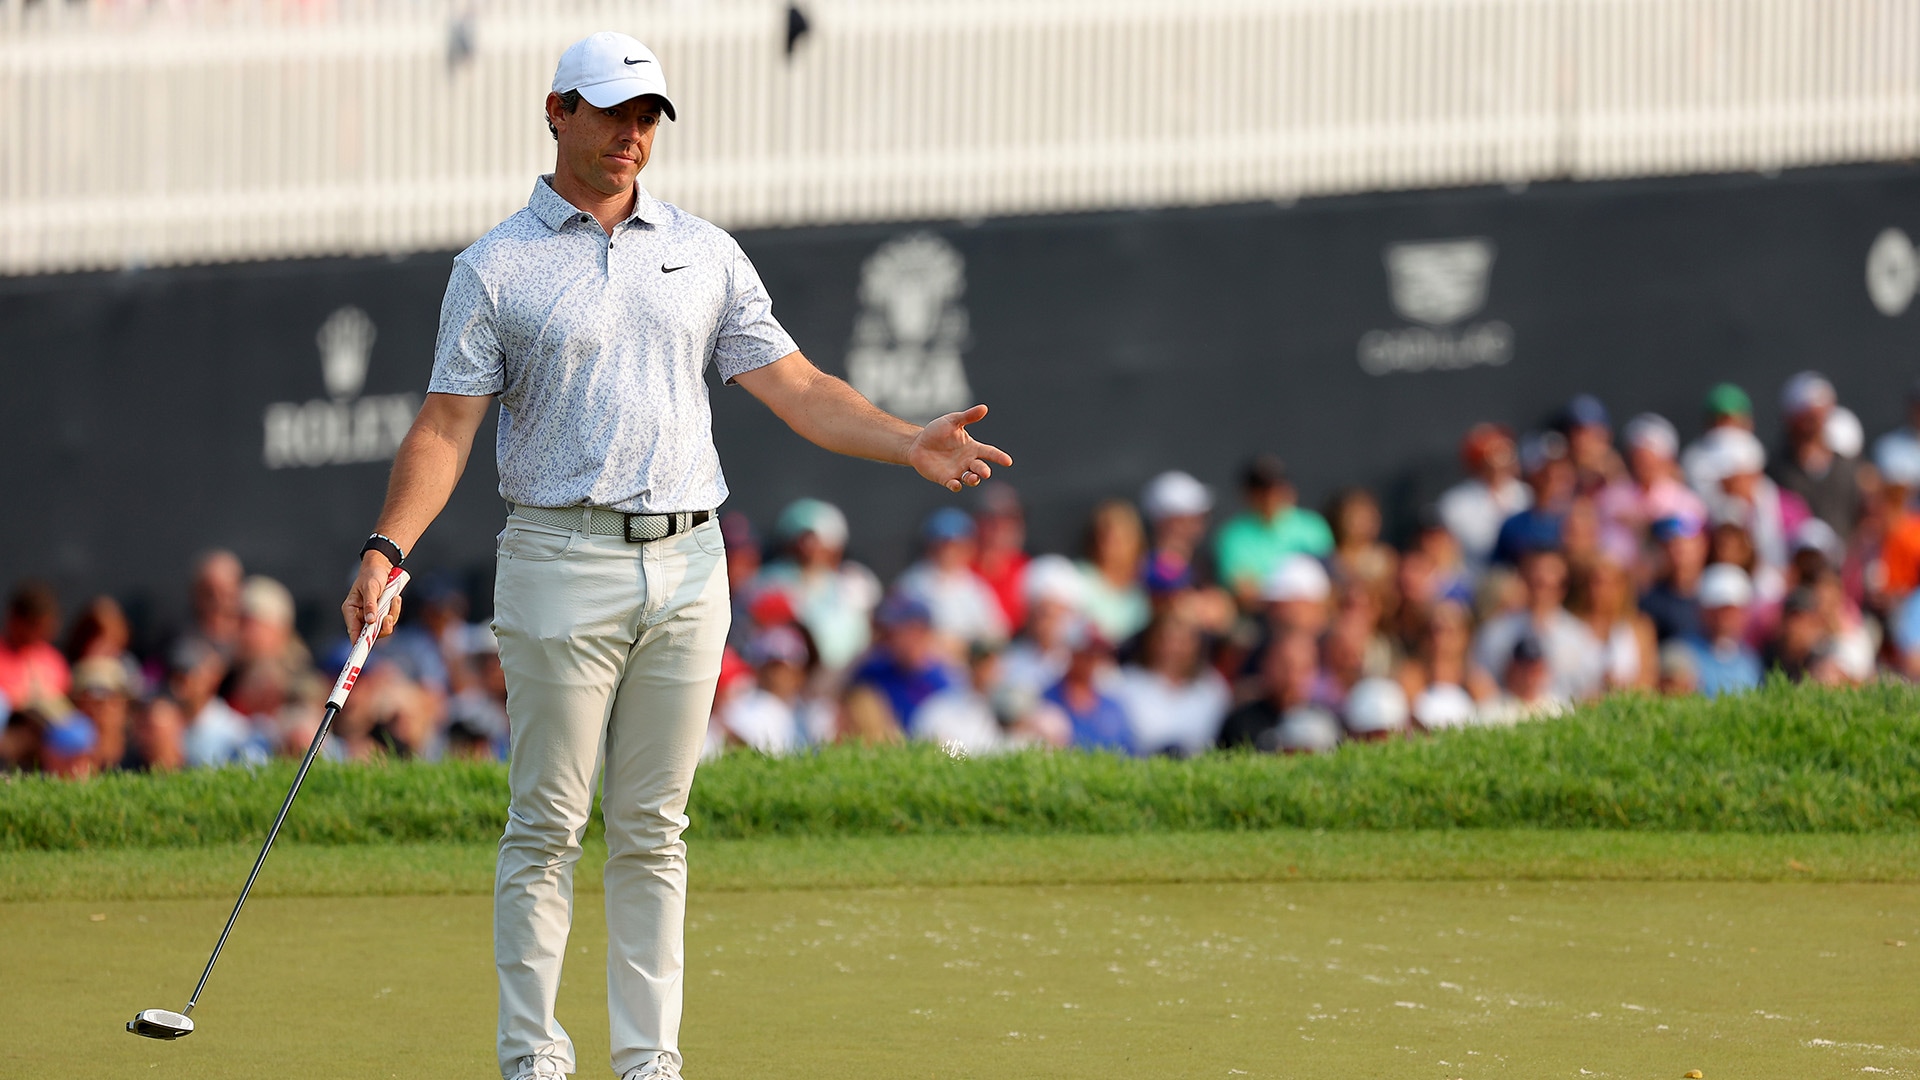 ‘Disappointing’ T-7 at PGA Championship leaves Rory McIlroy searching